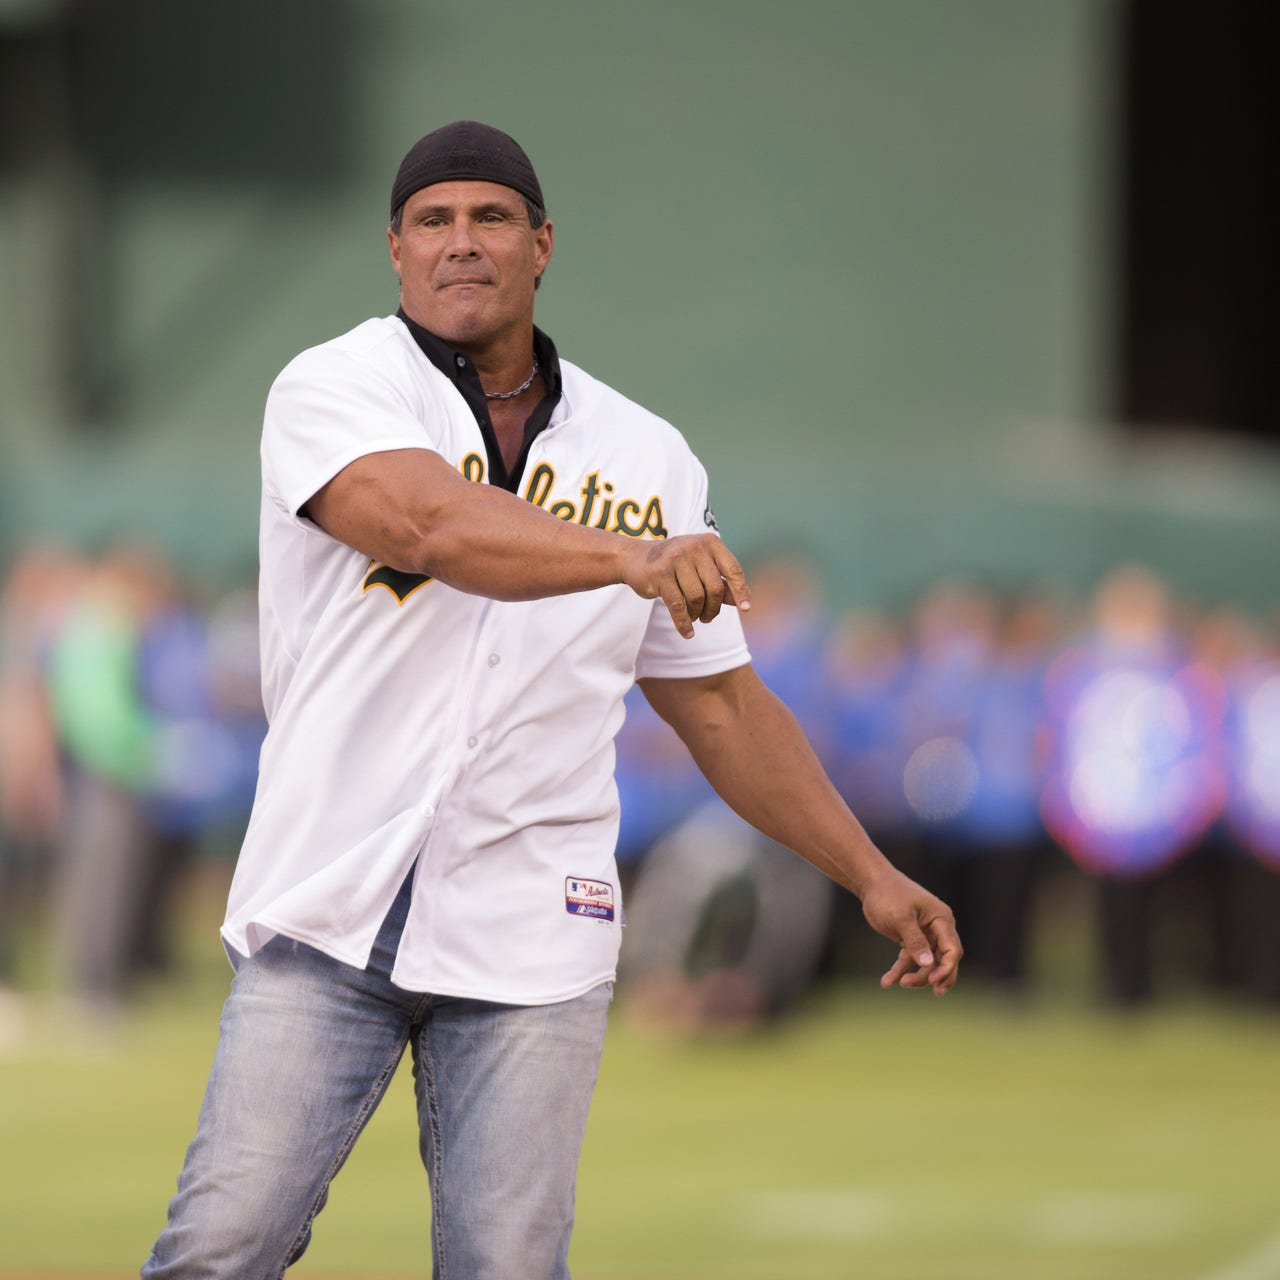 MLB History: Jose Canseco's Book Juiced Hits the Shelves